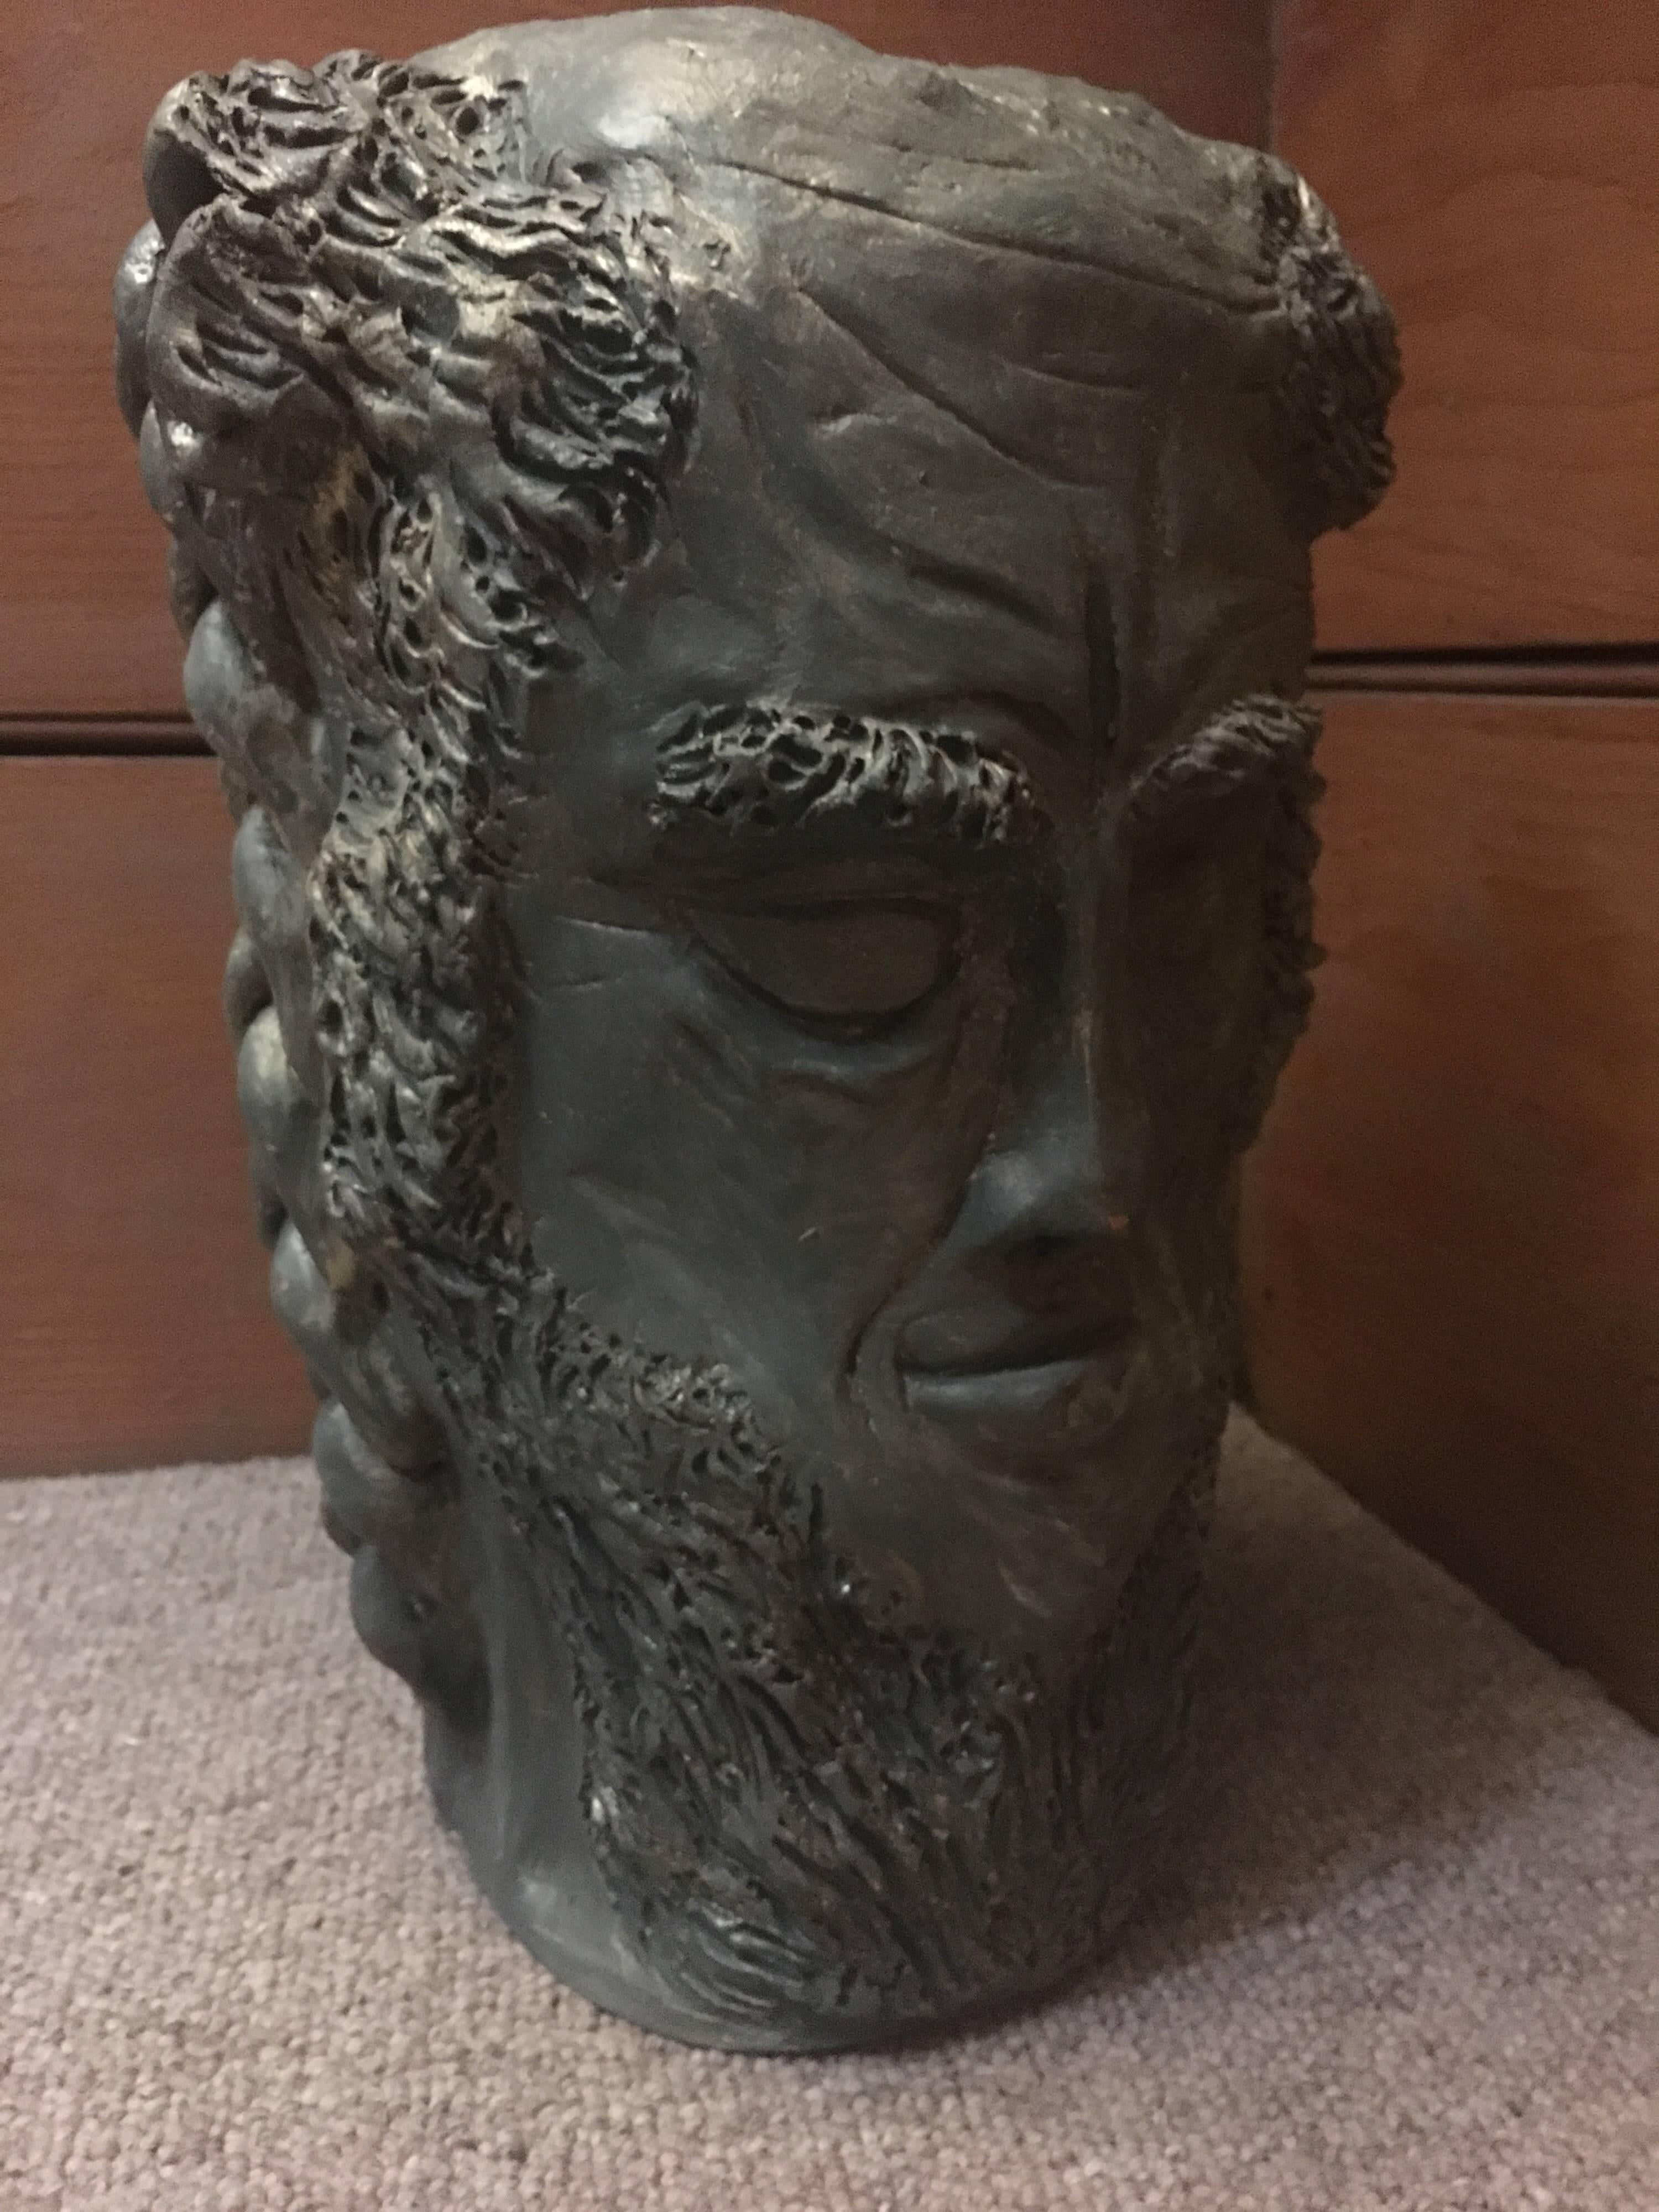 Head Sculpture Double Sided Man with Beard,
By French artist, Gabriel Jenny, Mid 20th Century
The artist has inscribed their initials near the bottom, please see images
Medium: clay/plaster
Size of the head approx: 13 x 9 inches

Intriguing